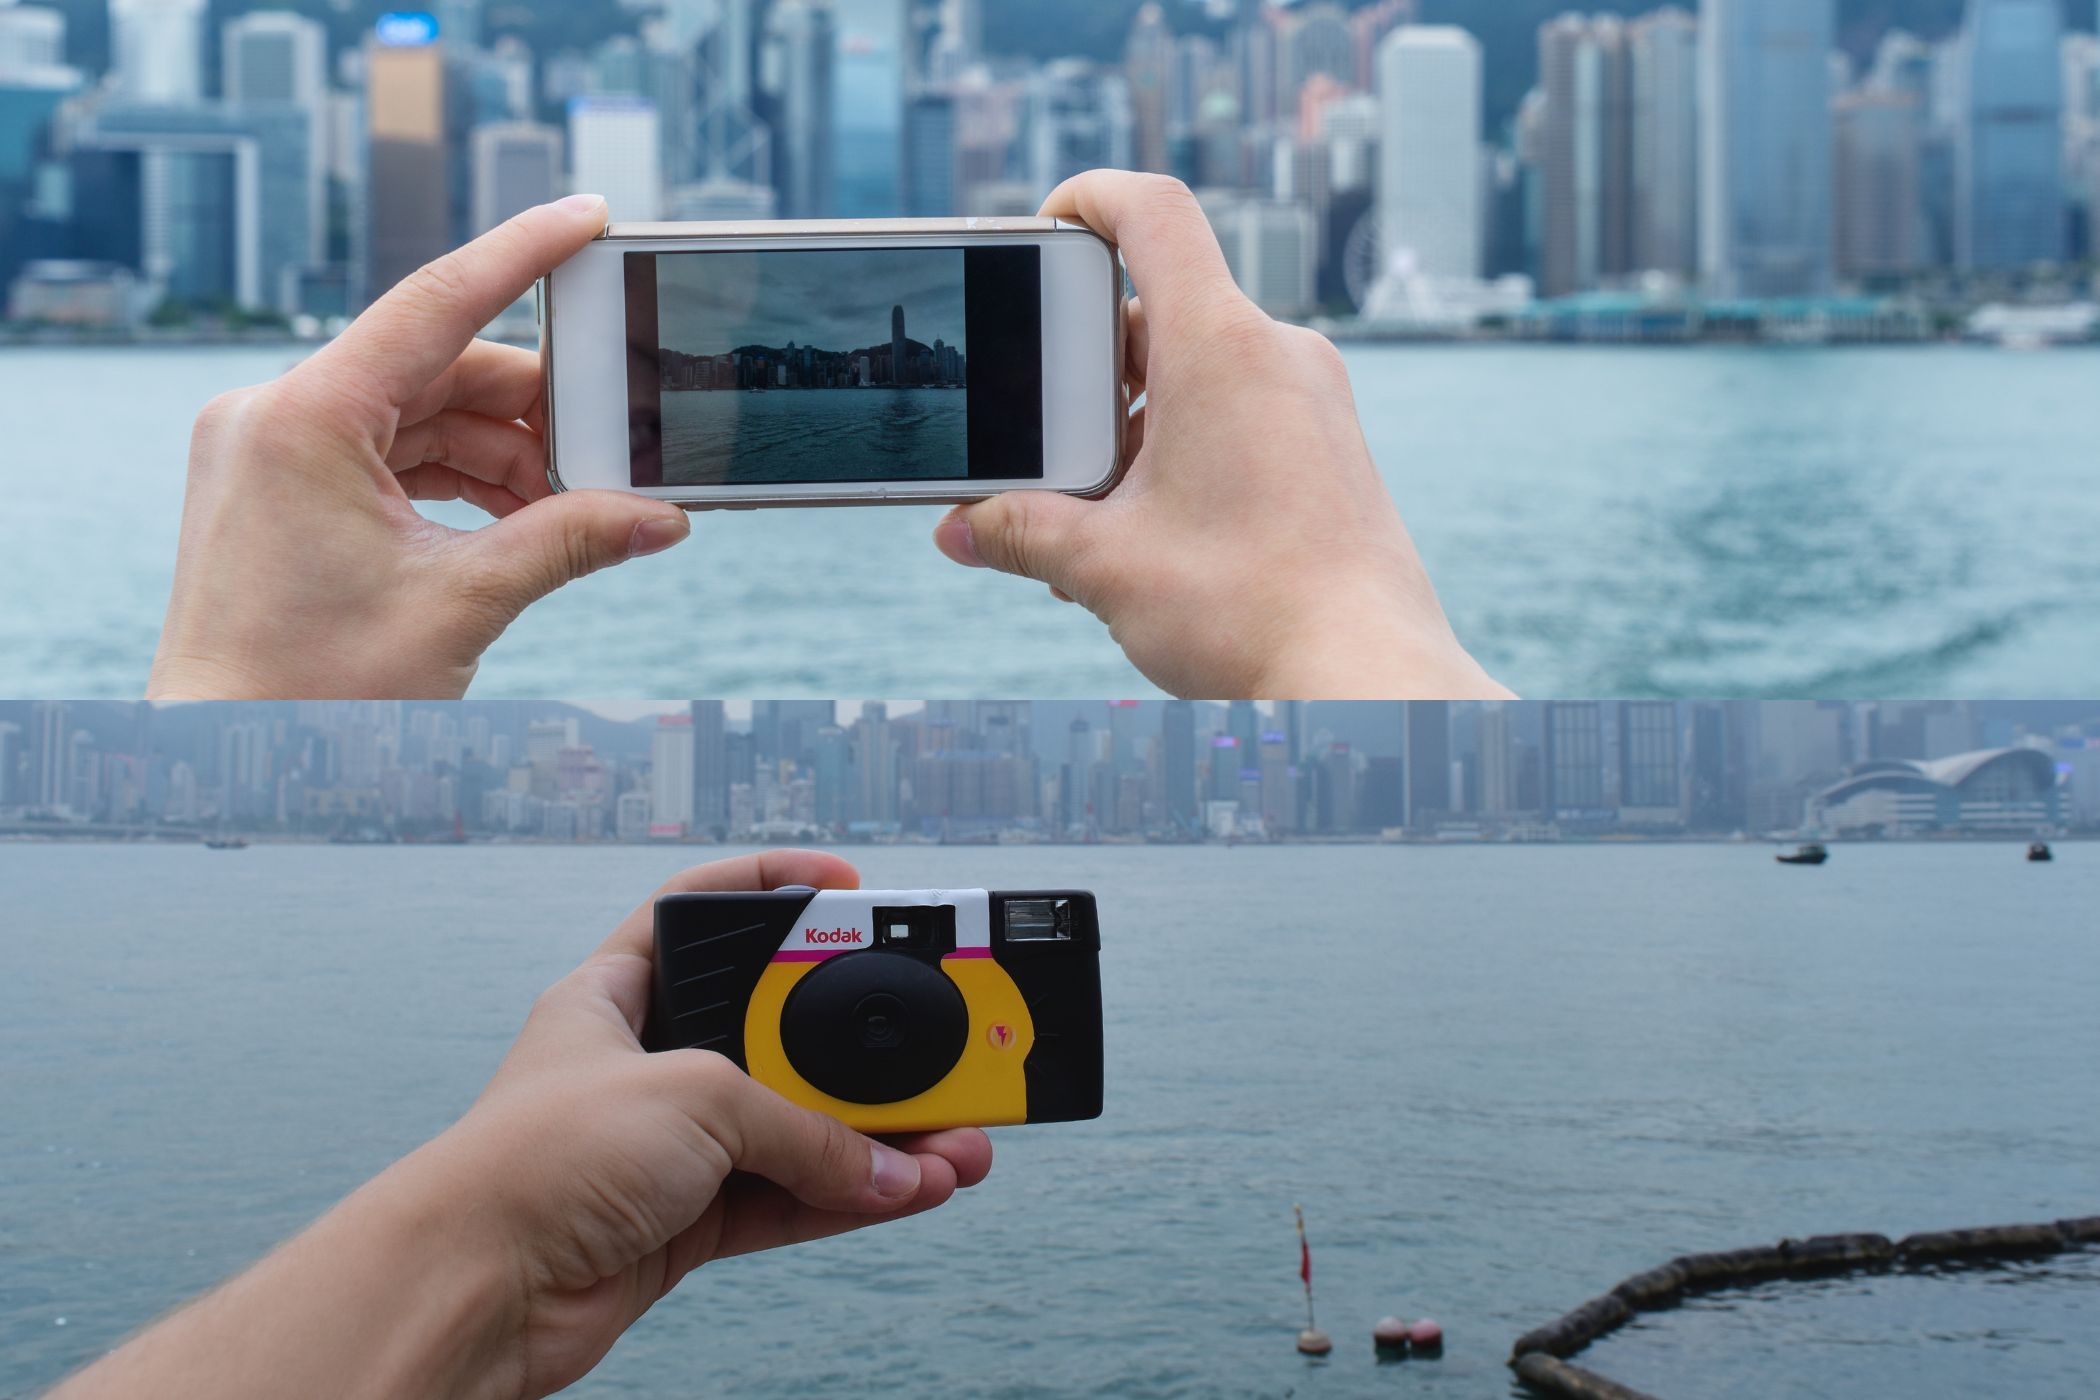 Smartphone vs. Disposable Camera: Which Is Better for Documenting Trips?